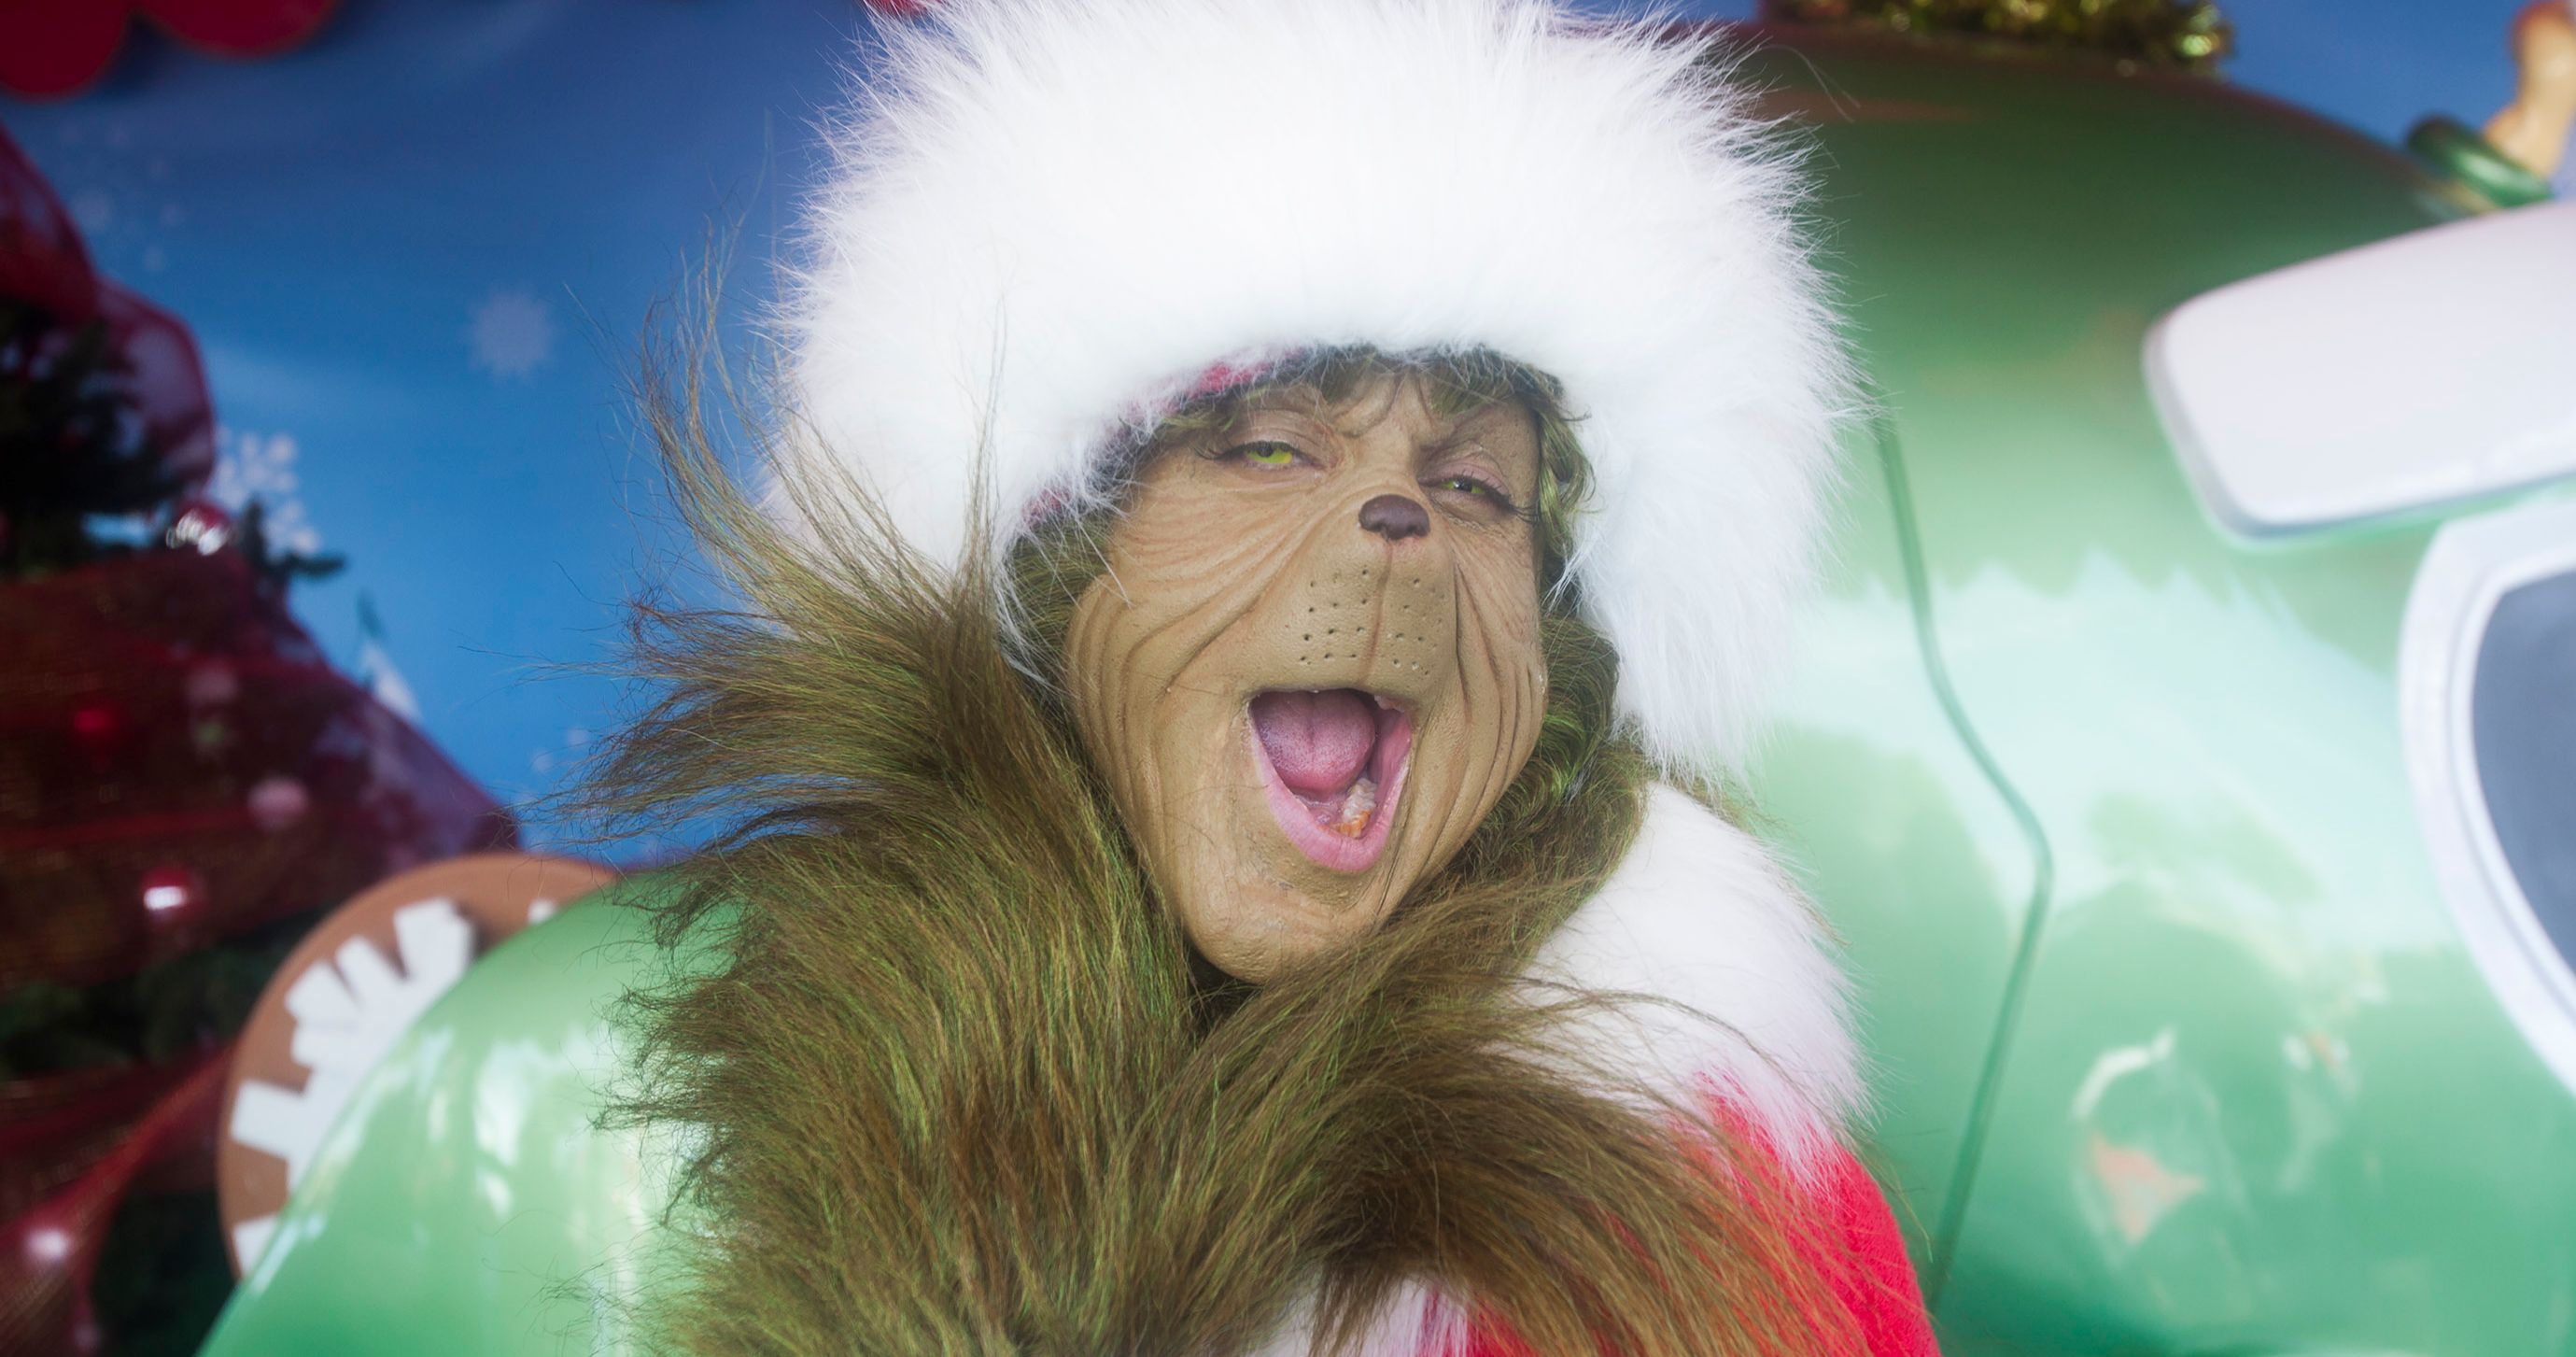 The Grinch Is Doing Free Customized Grinchmas Greetings Via Cameo for the Holidays